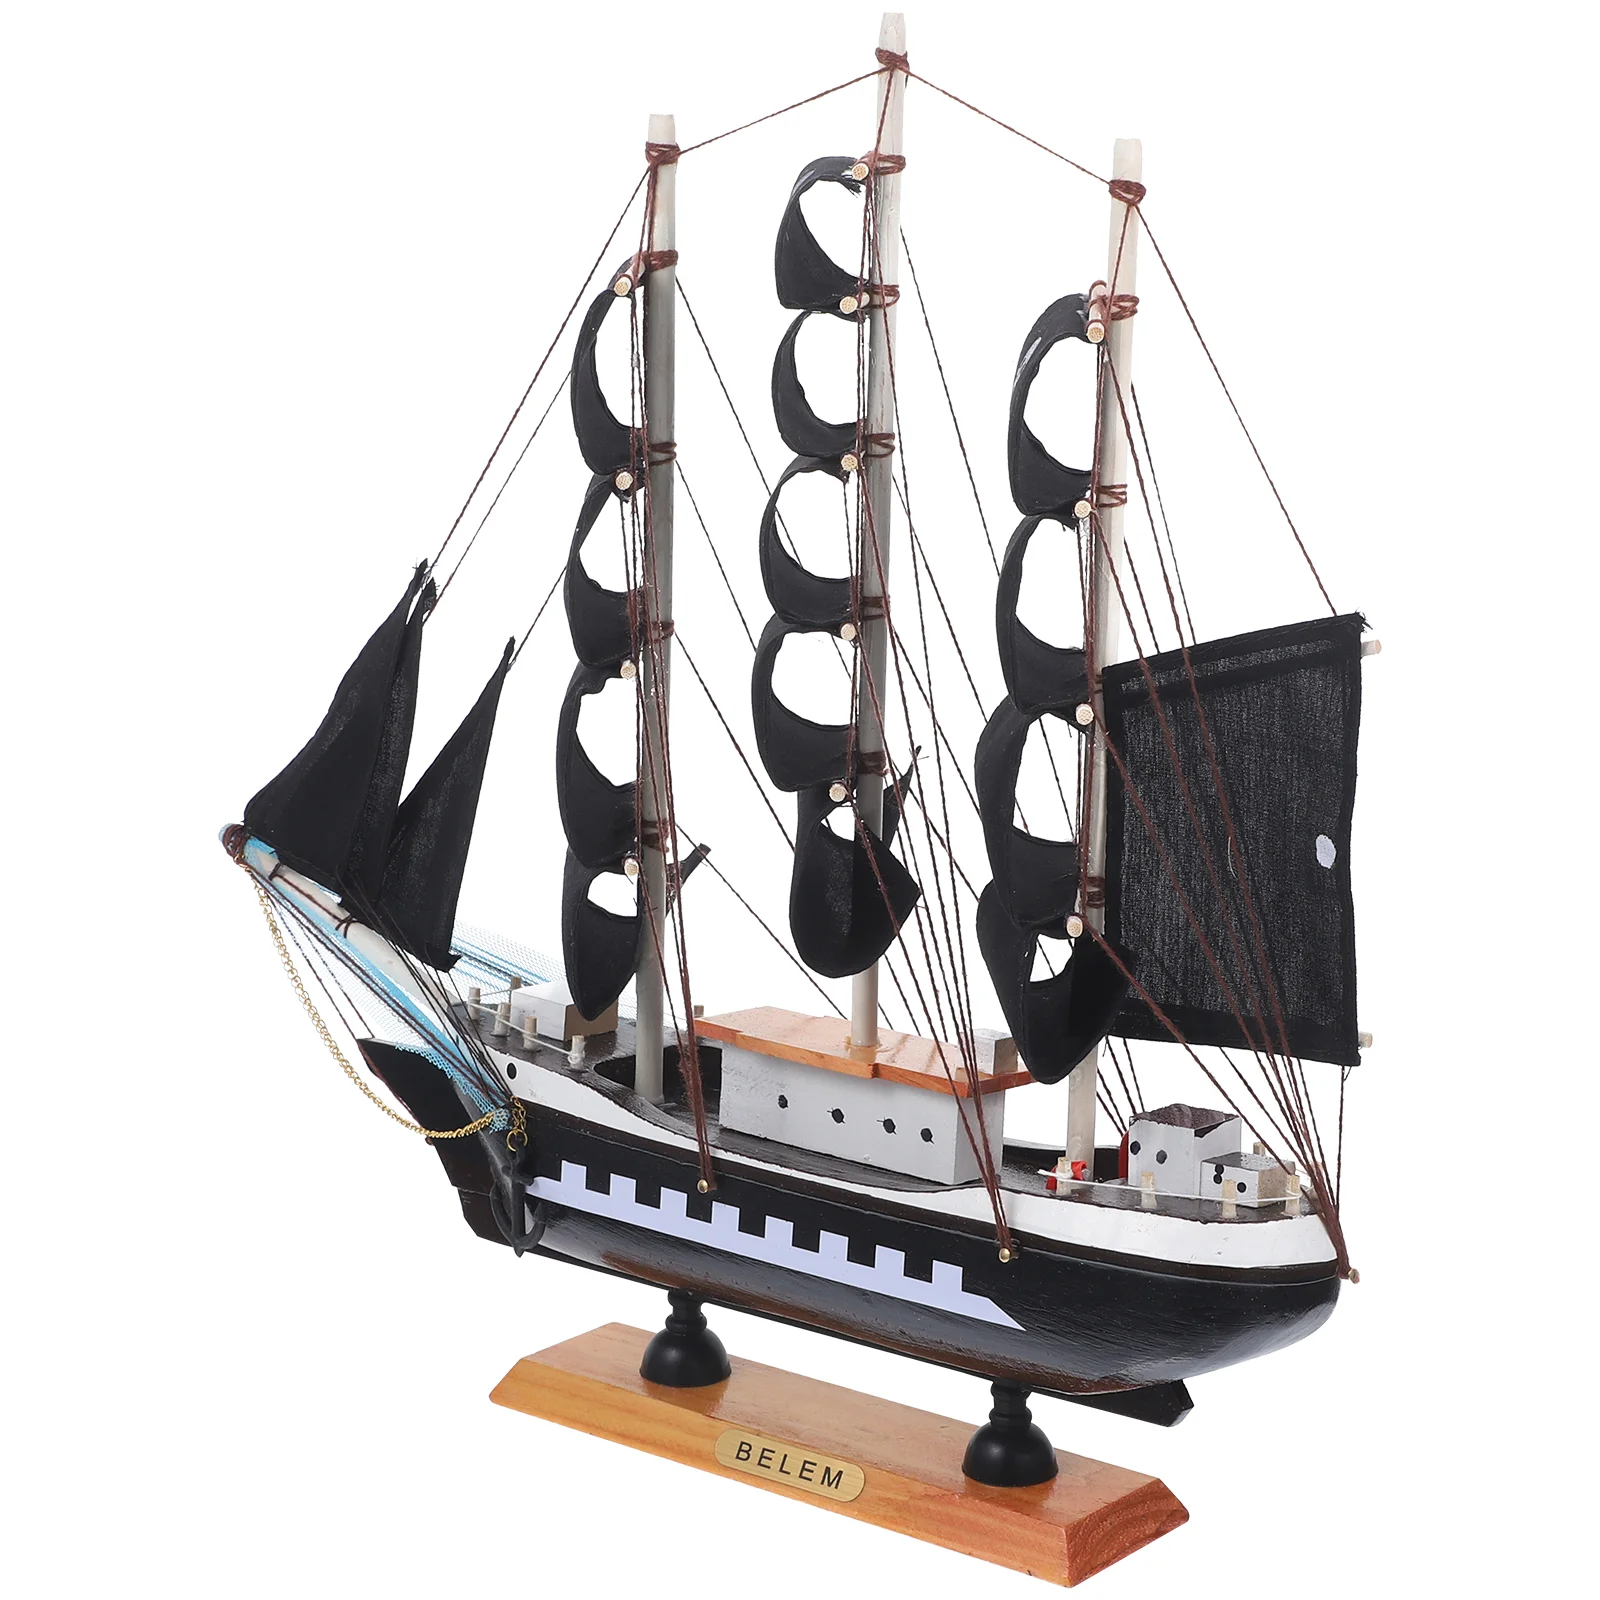 

33cm Pirate Wooden Sailing Ship Model Sailboat Decor Toys Dining Room Table Accessories